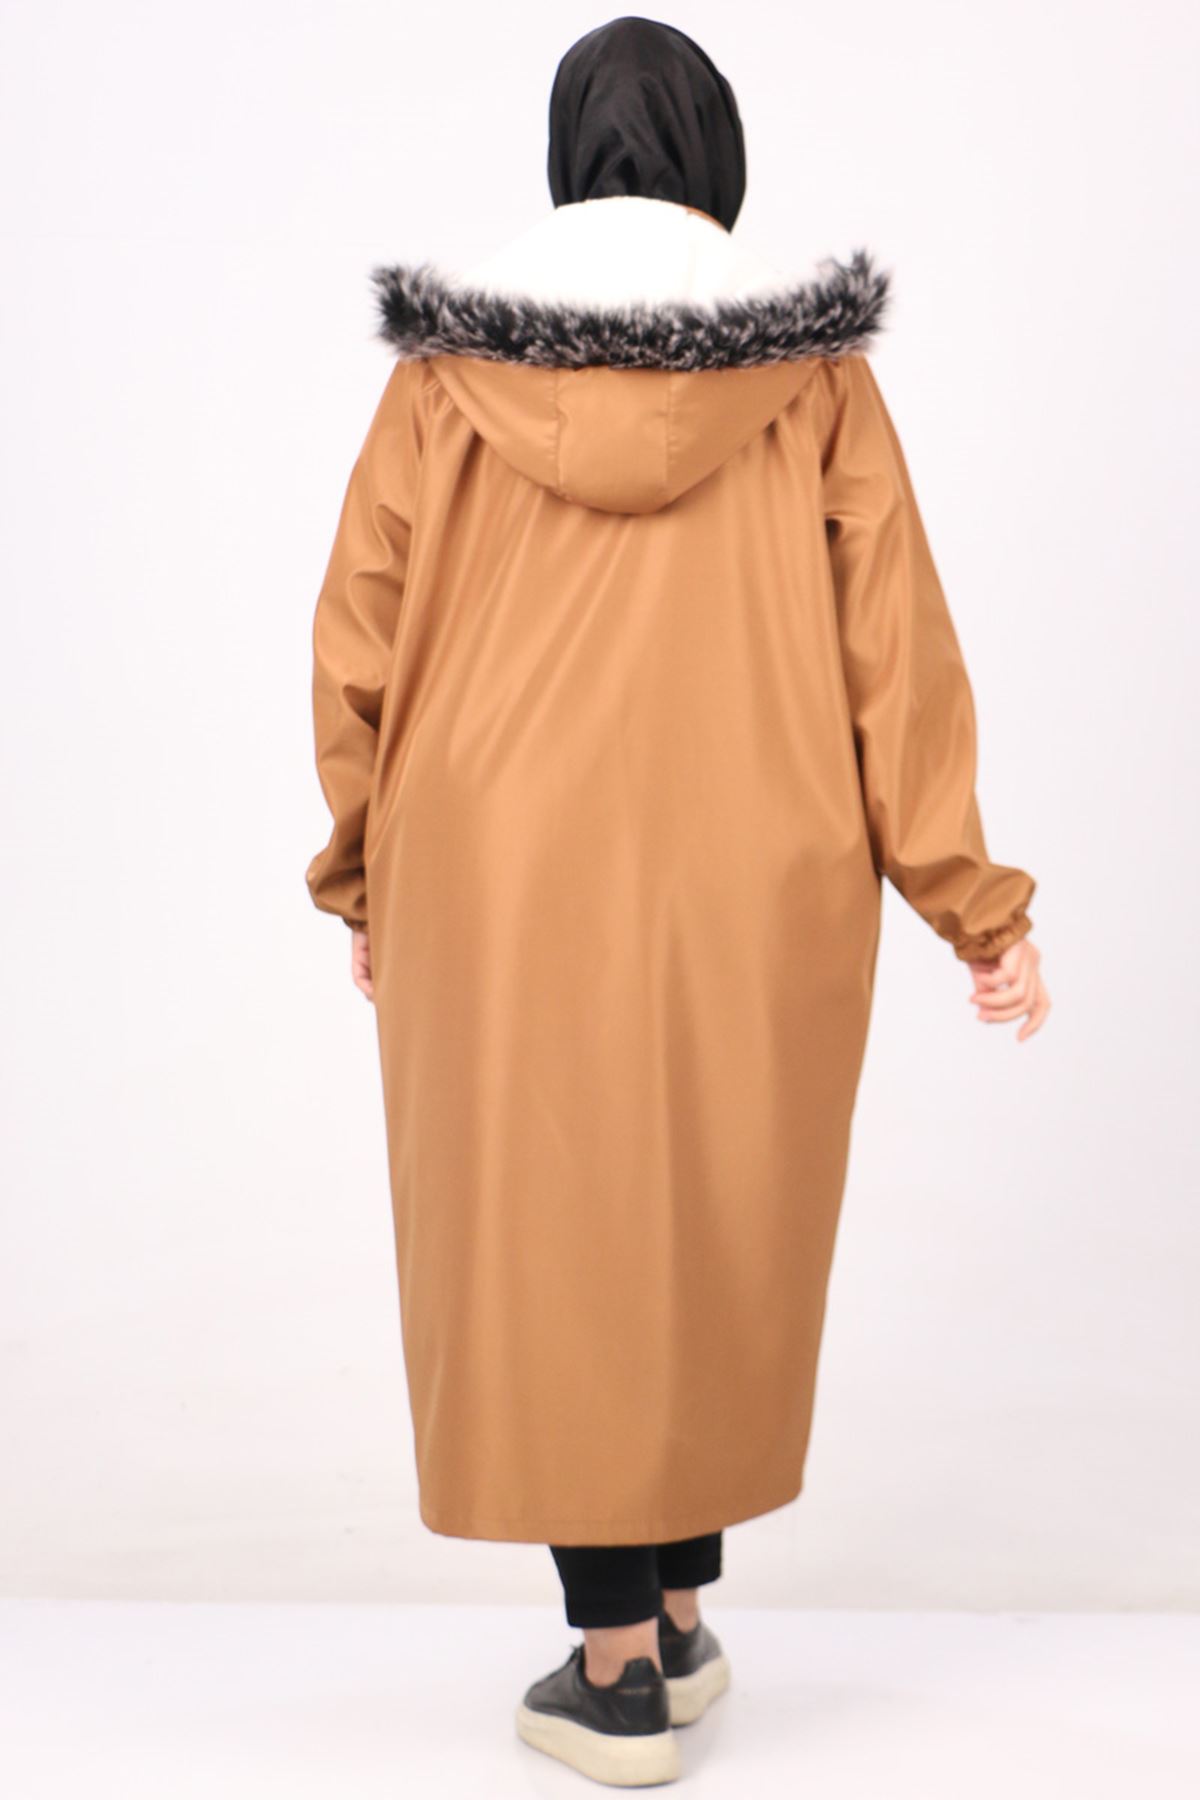 short frock with hijab